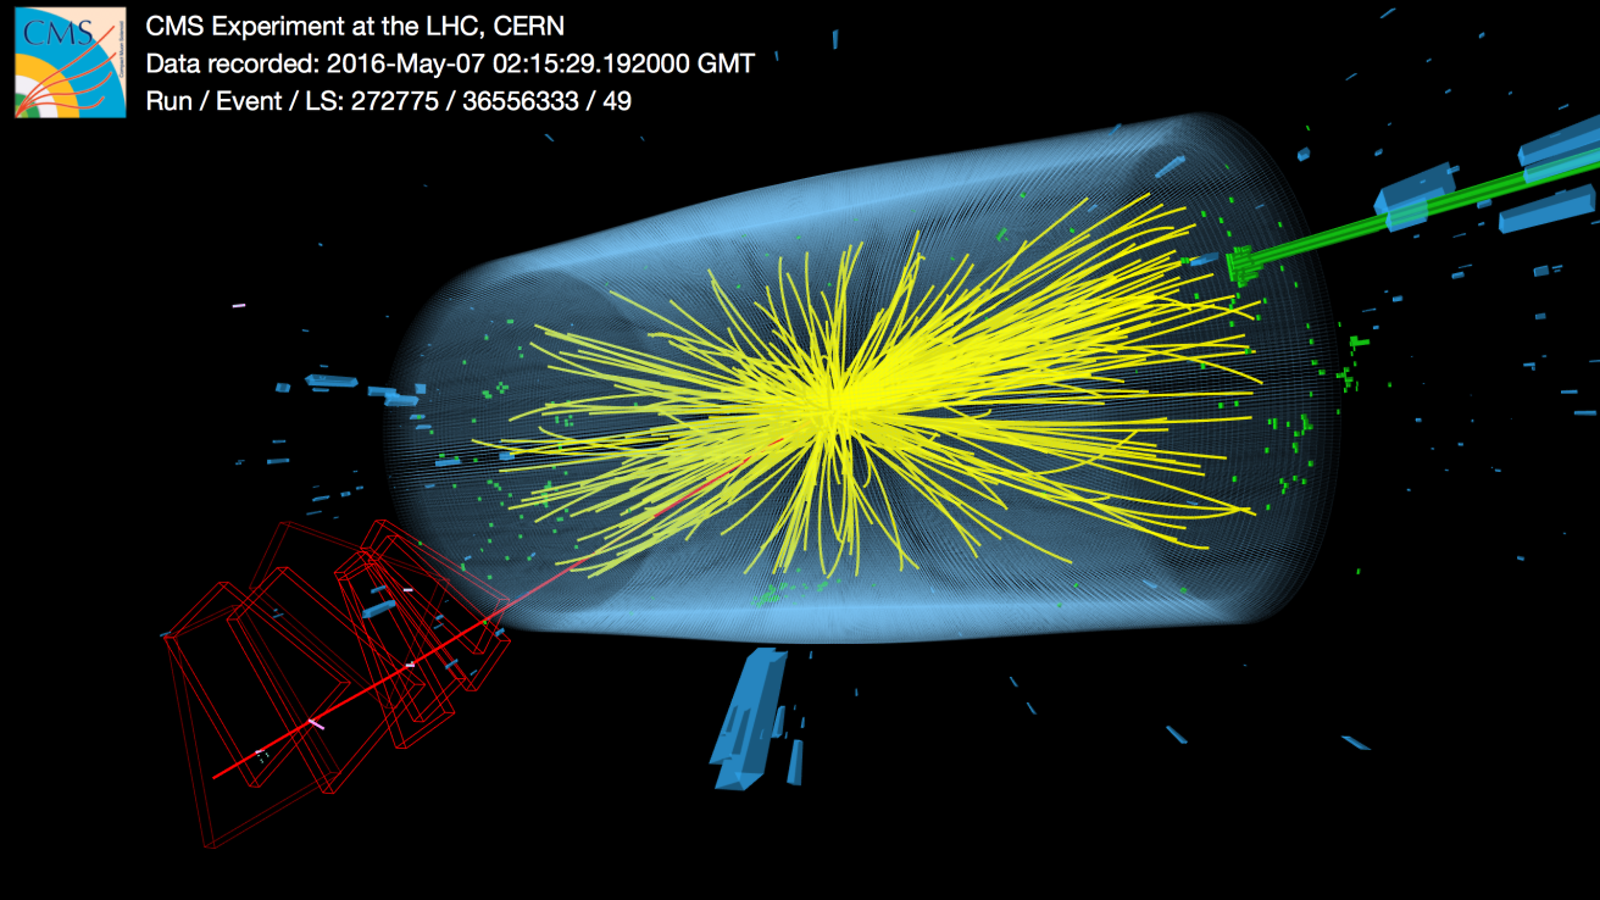 Large Hadron Collider prepares to deliver six times the data